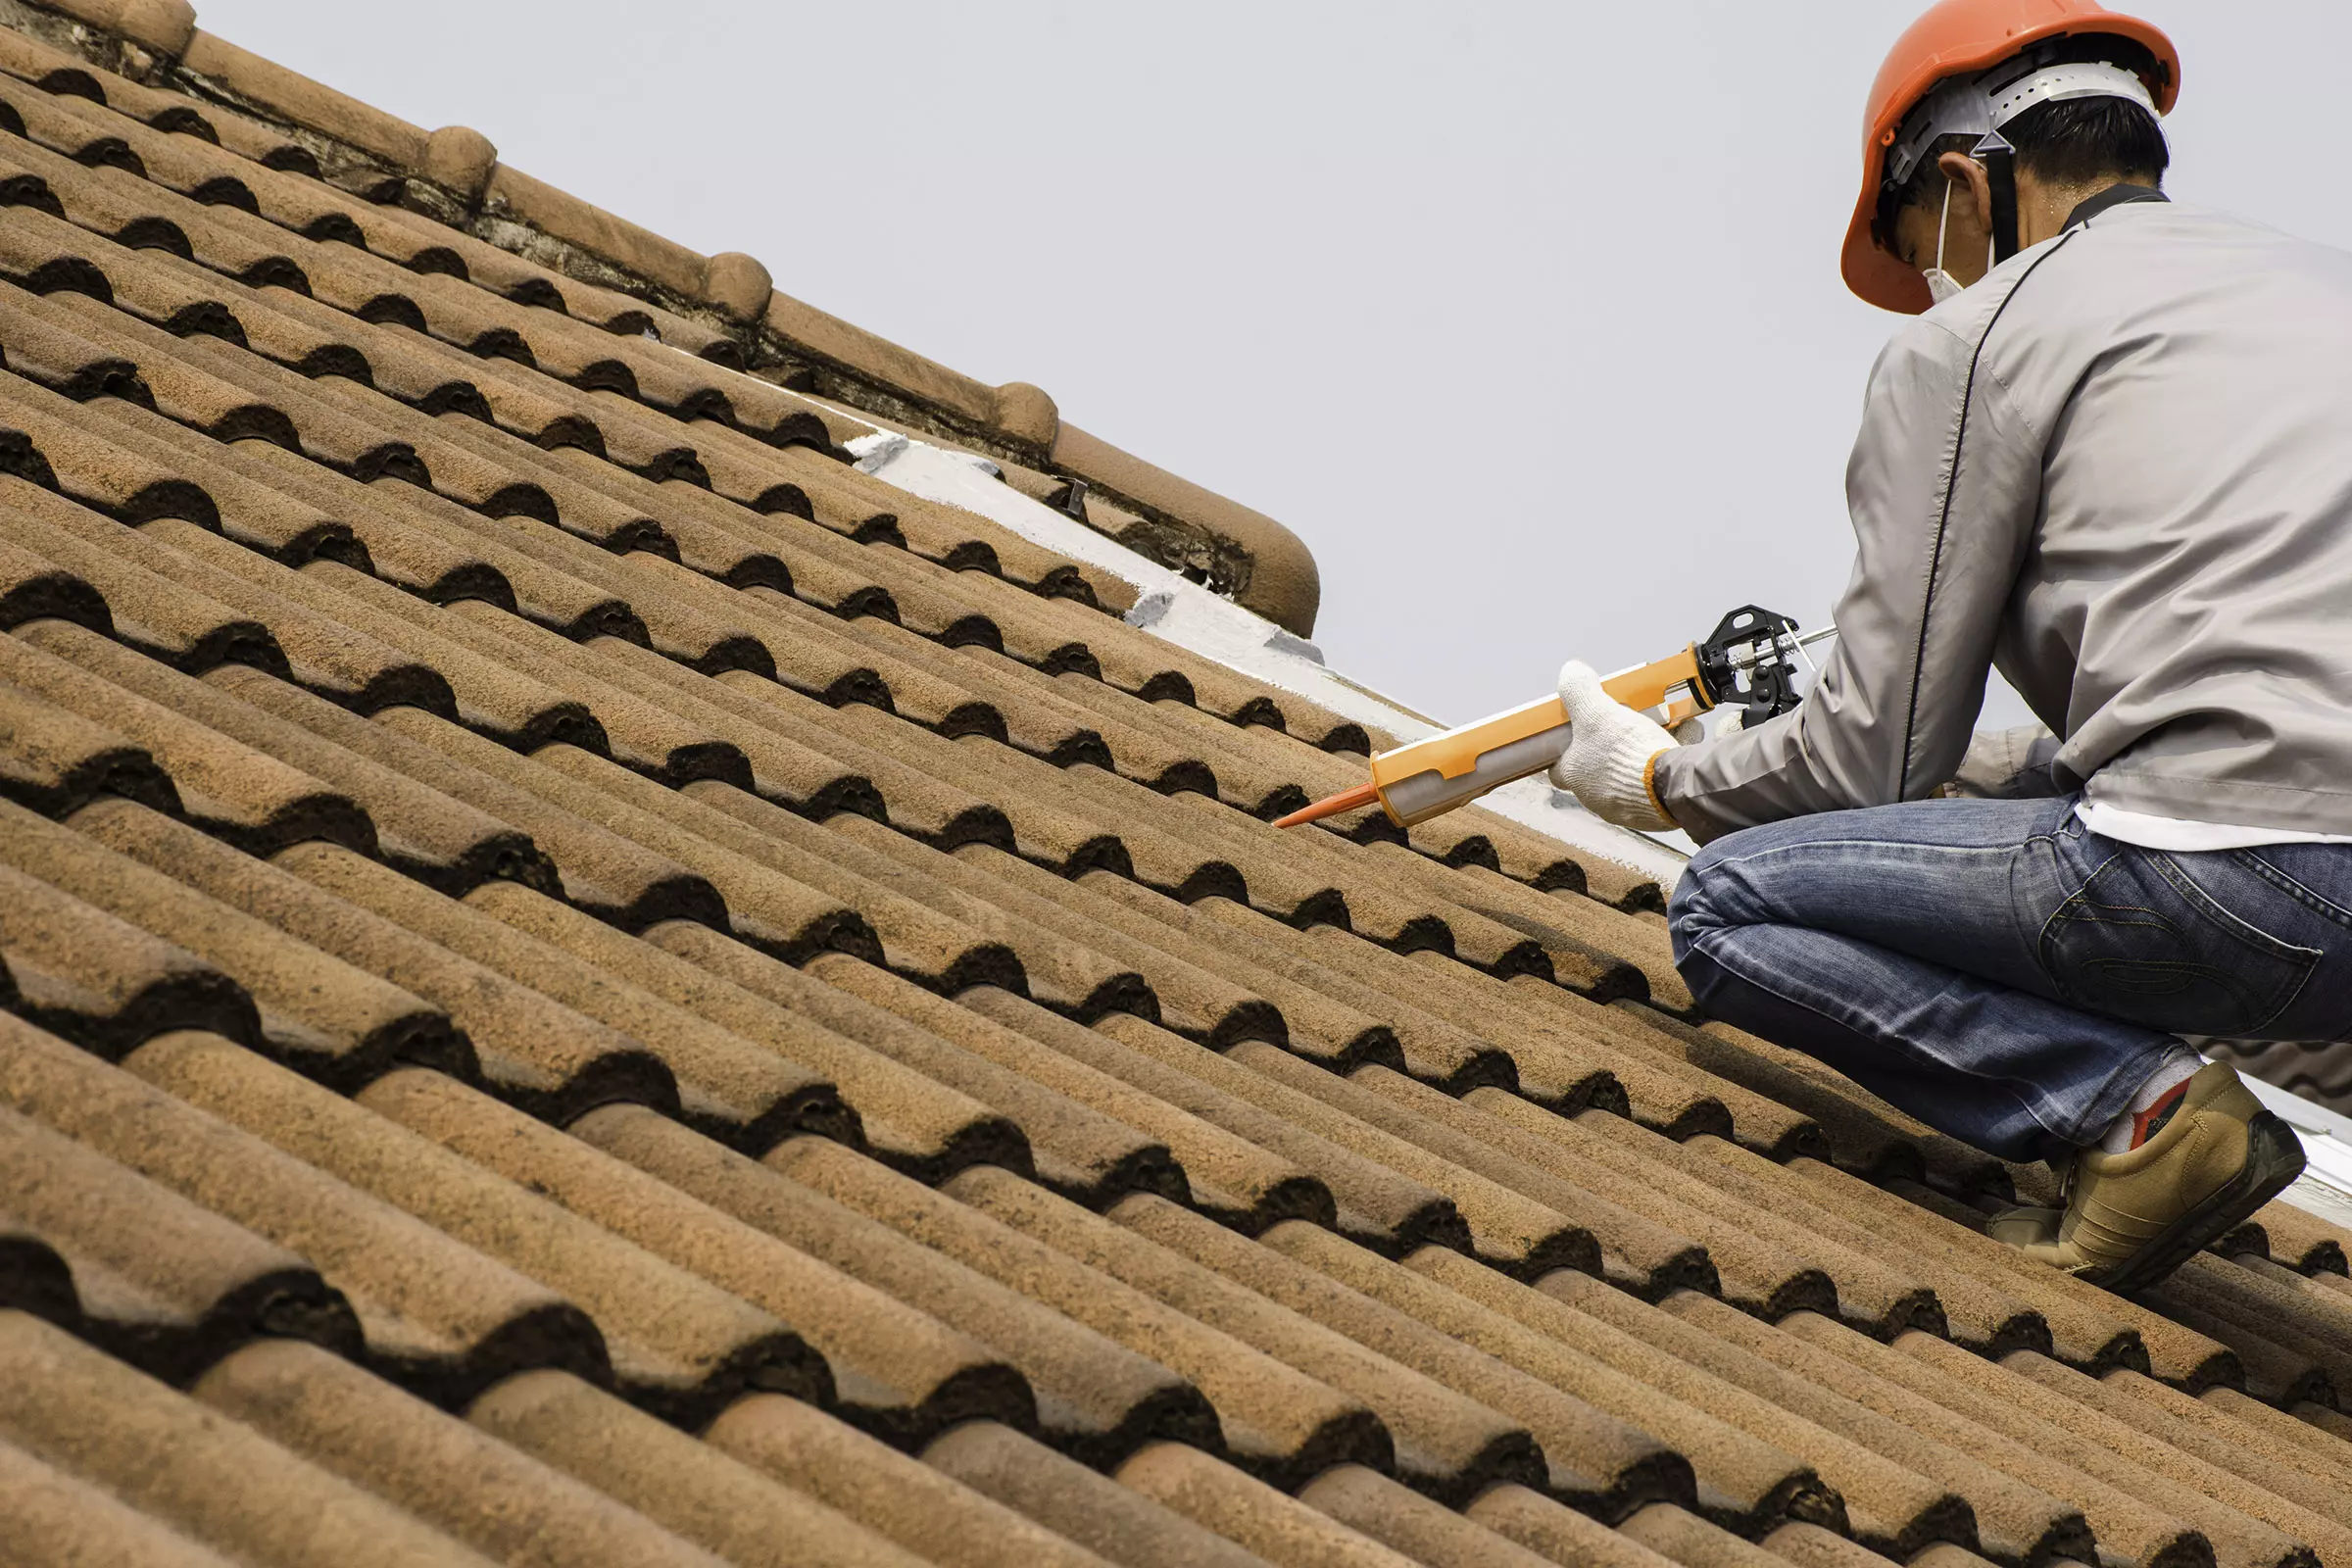 Does Preventative Roof Maintenance Save Money? - Best Choice Roofing